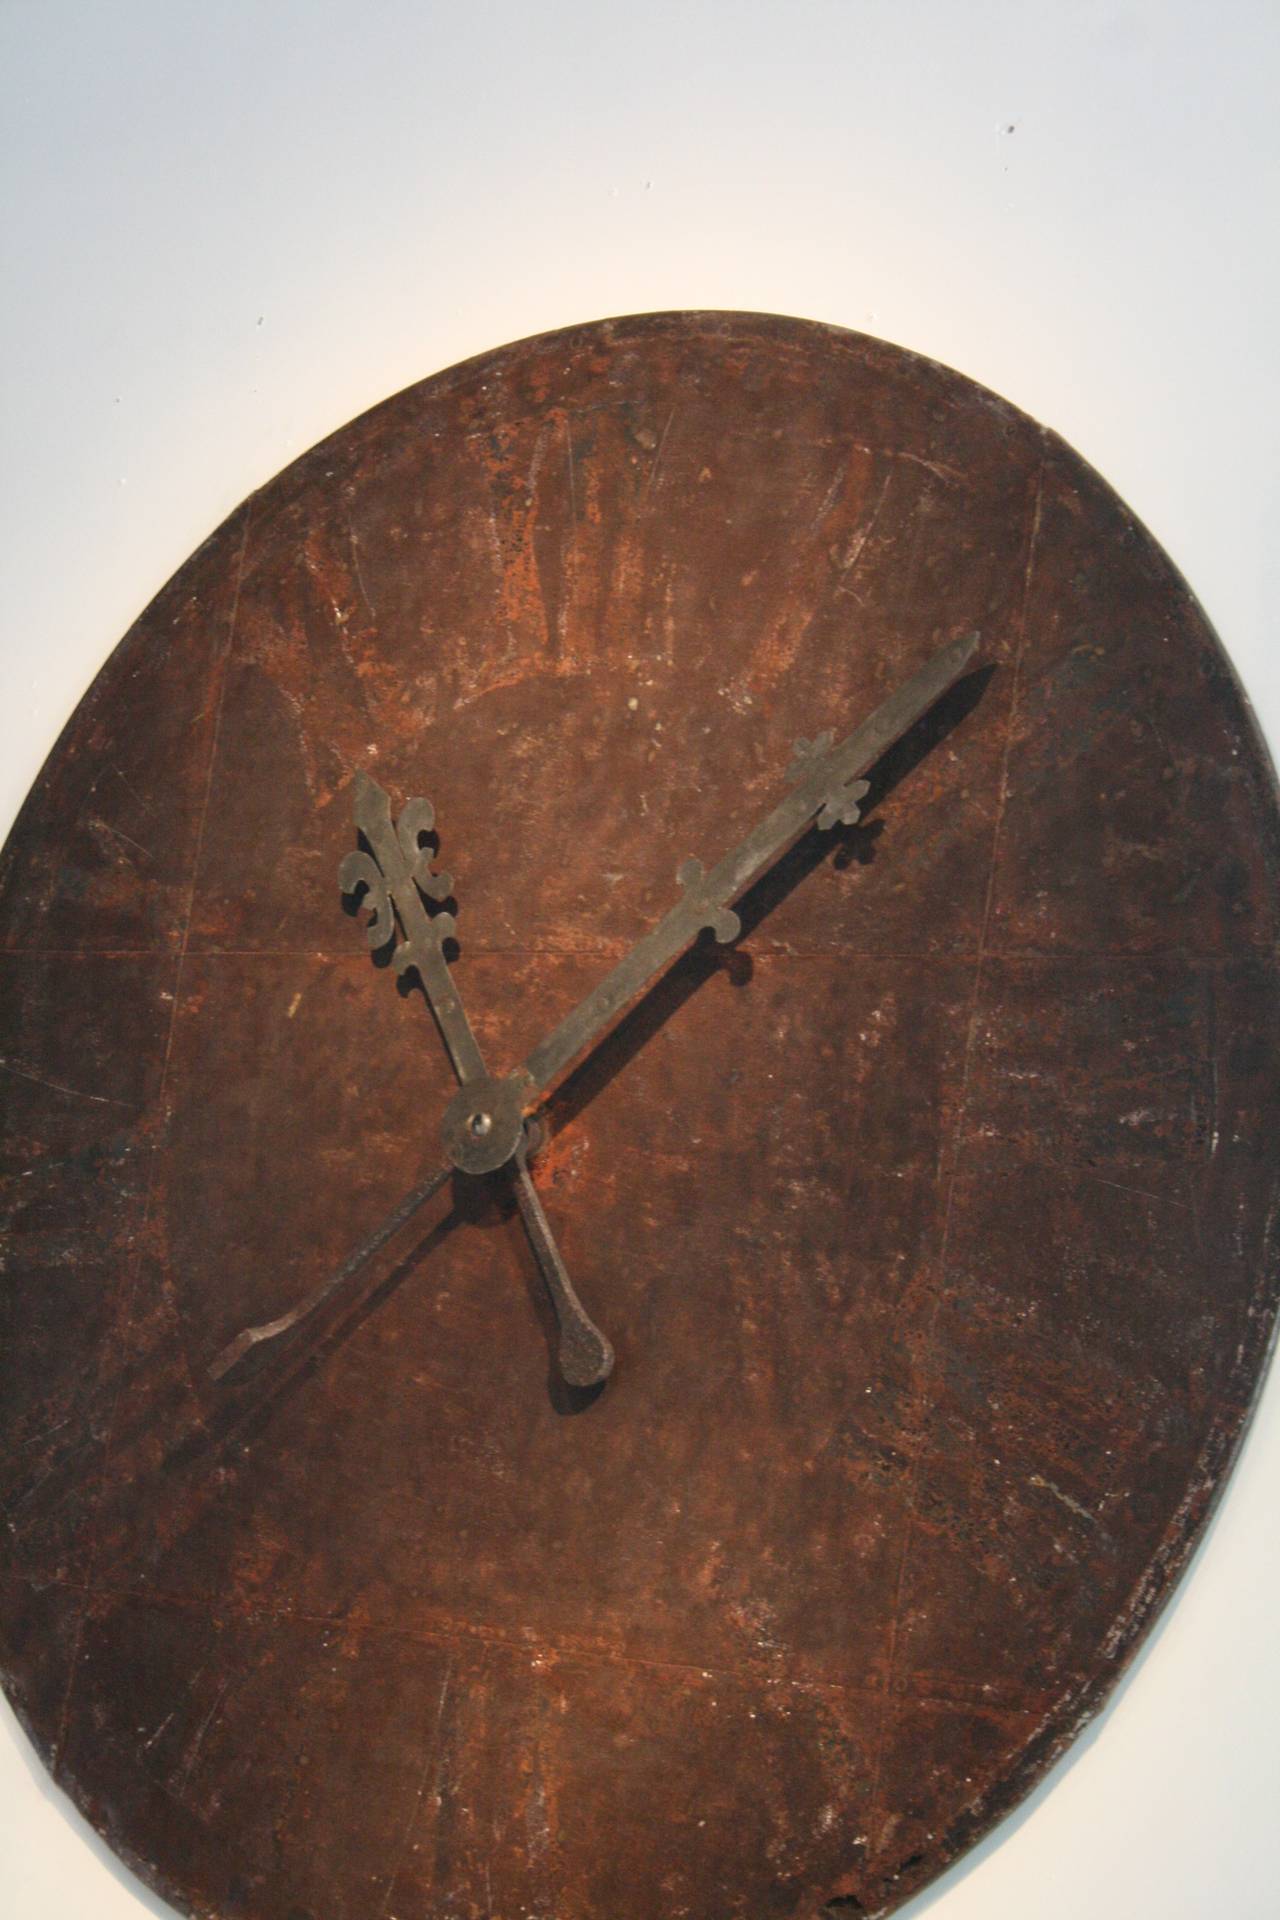 Beautifully faded painted metal clock face from Northern France, with original forged iron hands.